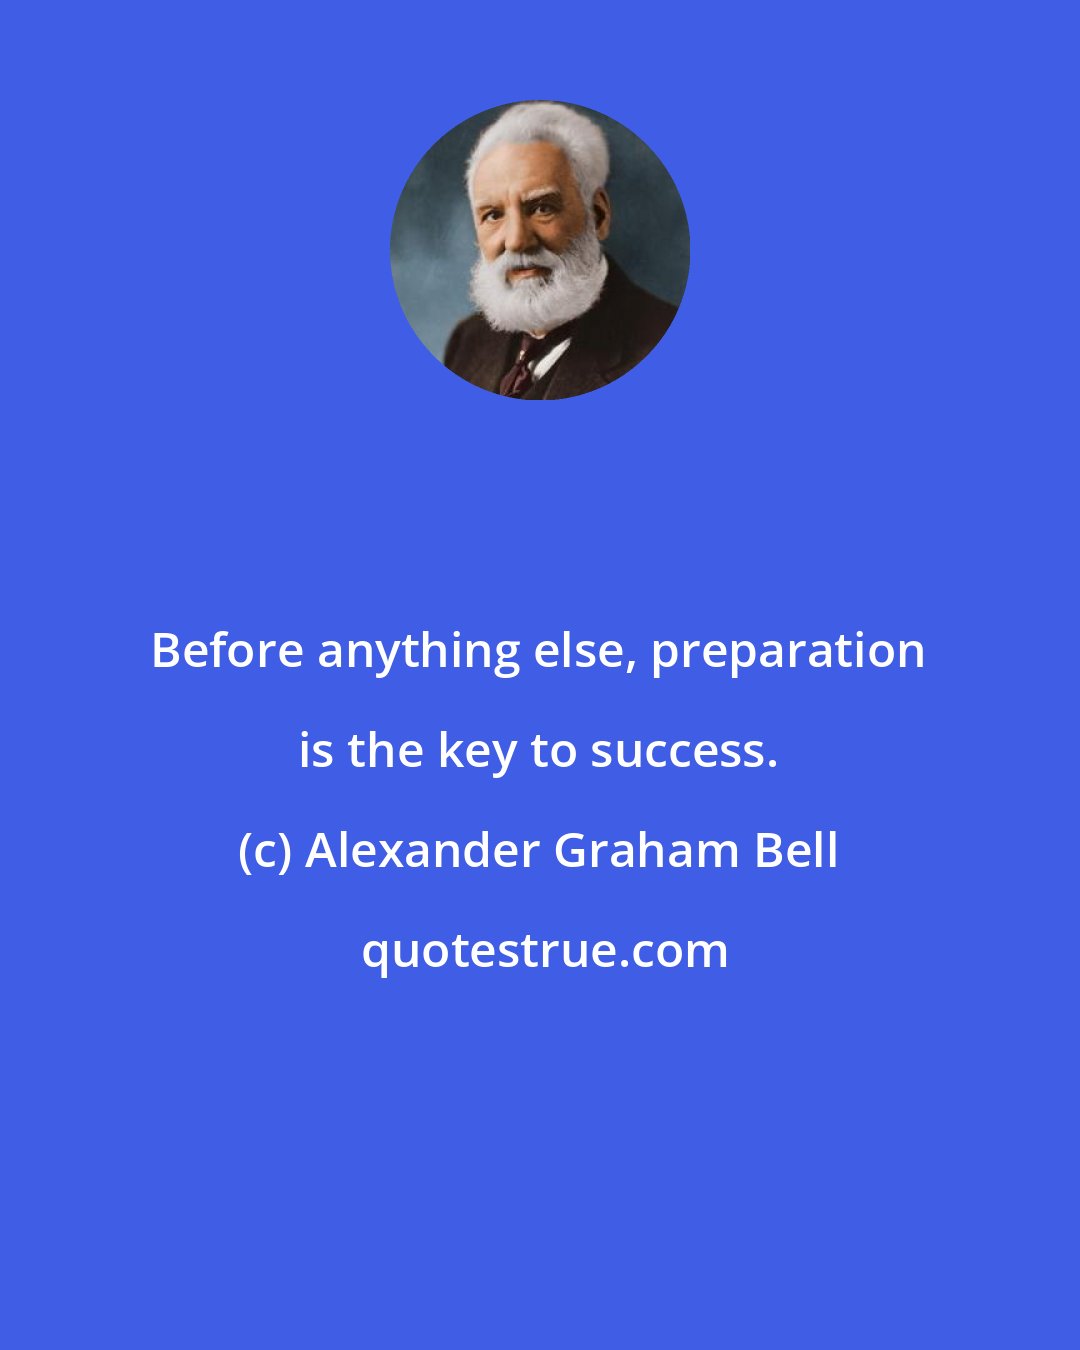 Alexander Graham Bell: Before anything else, preparation is the key to success.